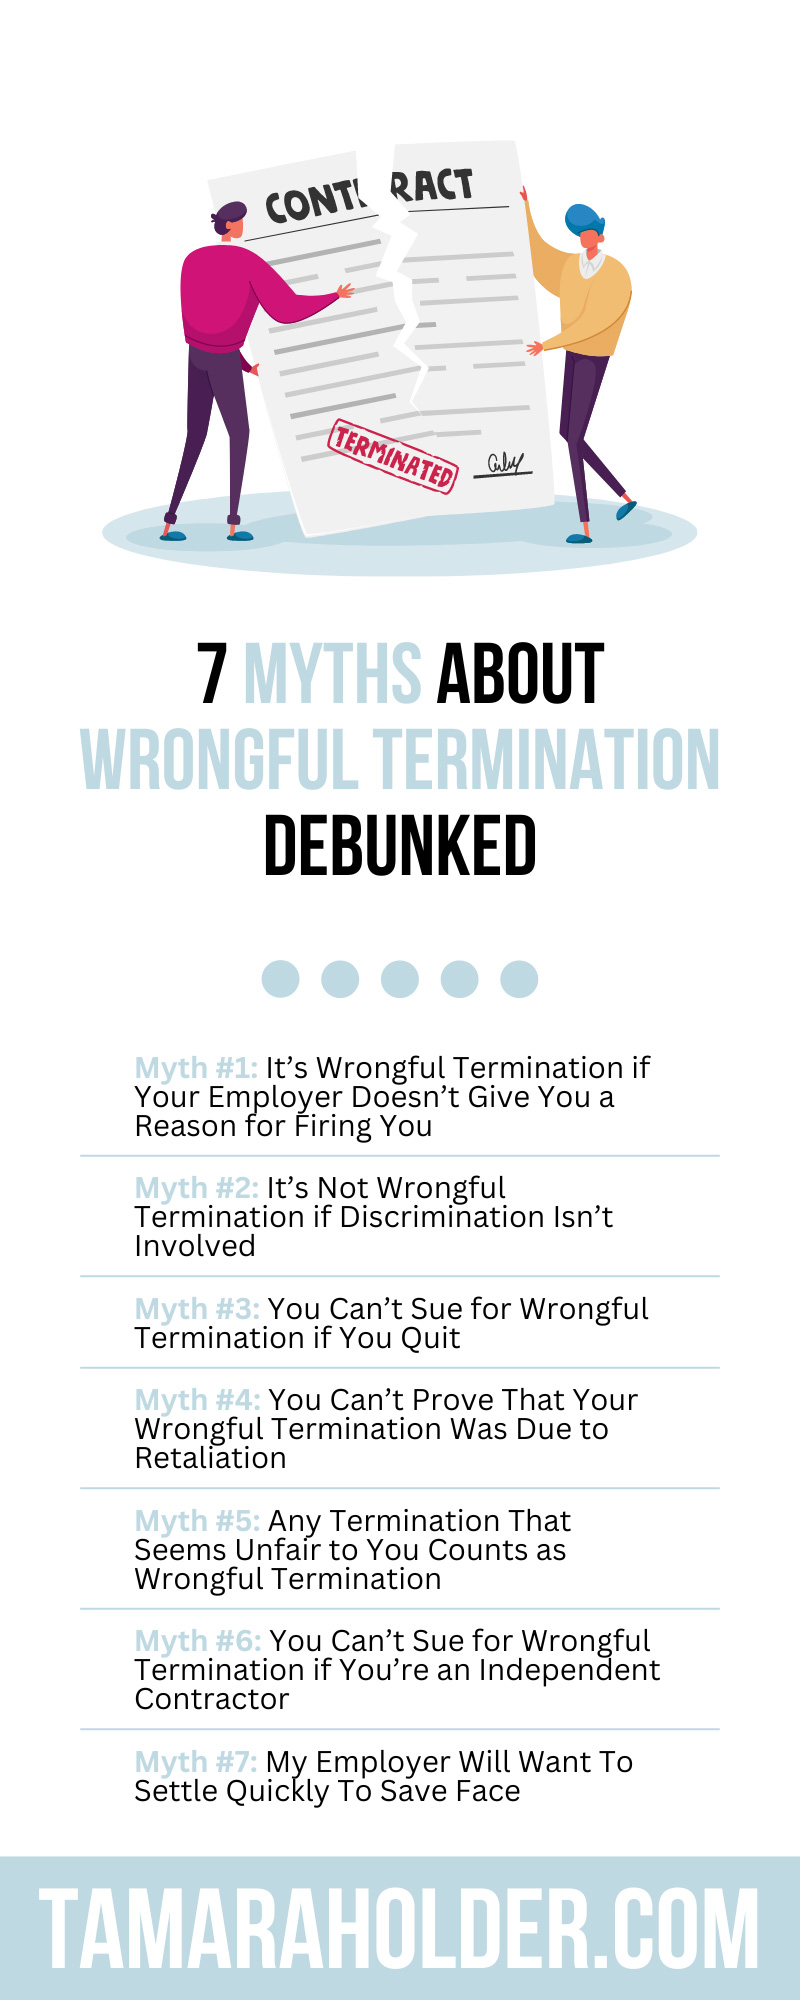 7 Myths About Wrongful Termination Debunked
